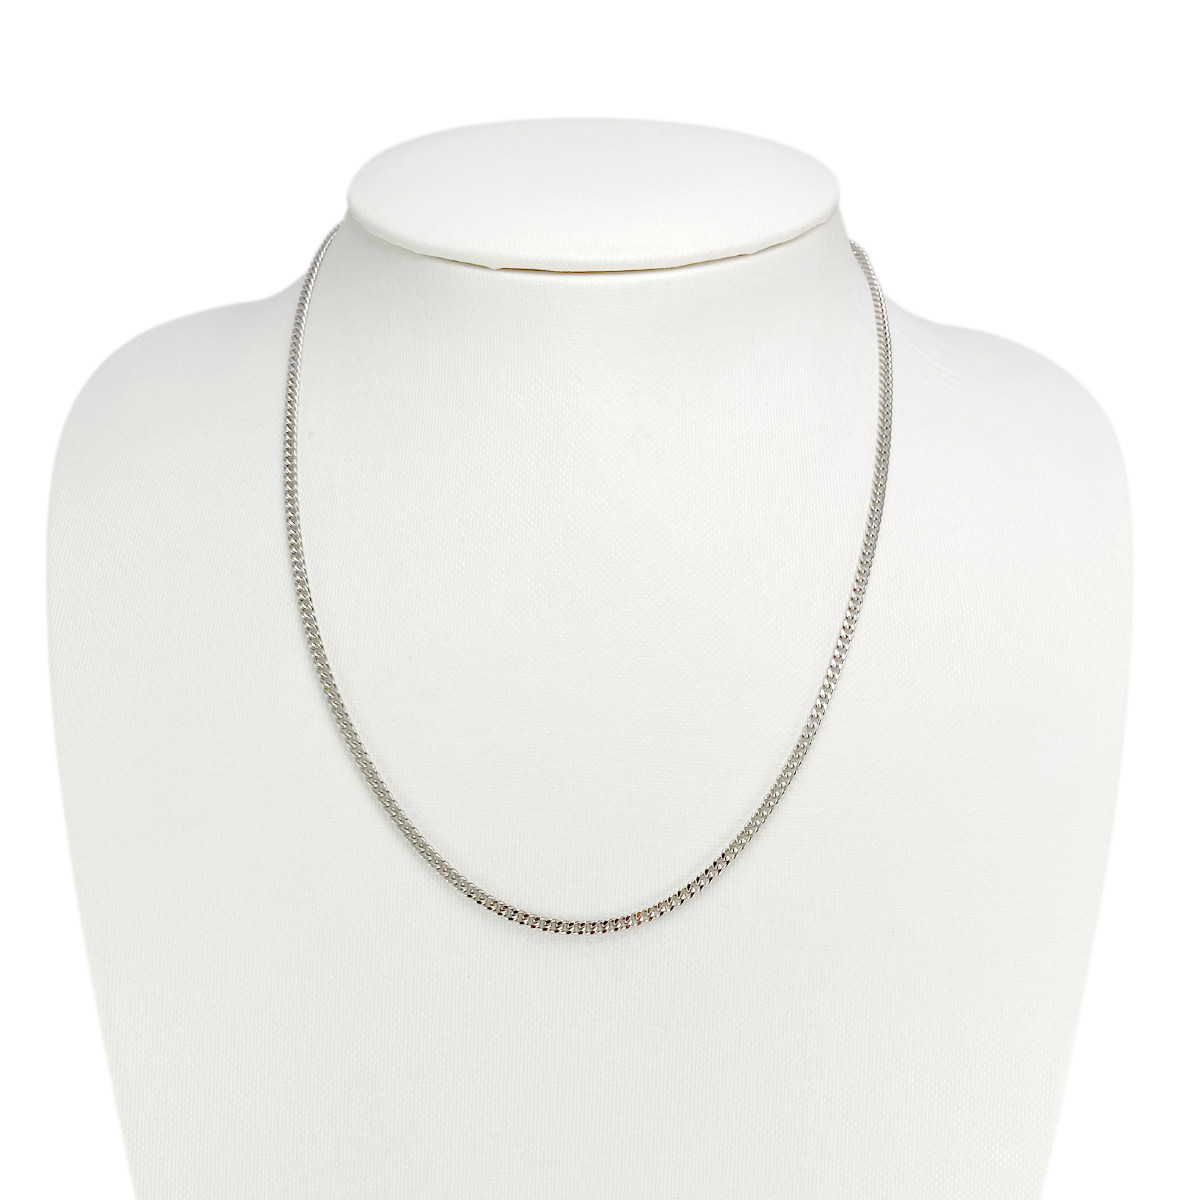 Collier d'occasion maille gourmette or 750 blanc 45,5 cm - vue 2